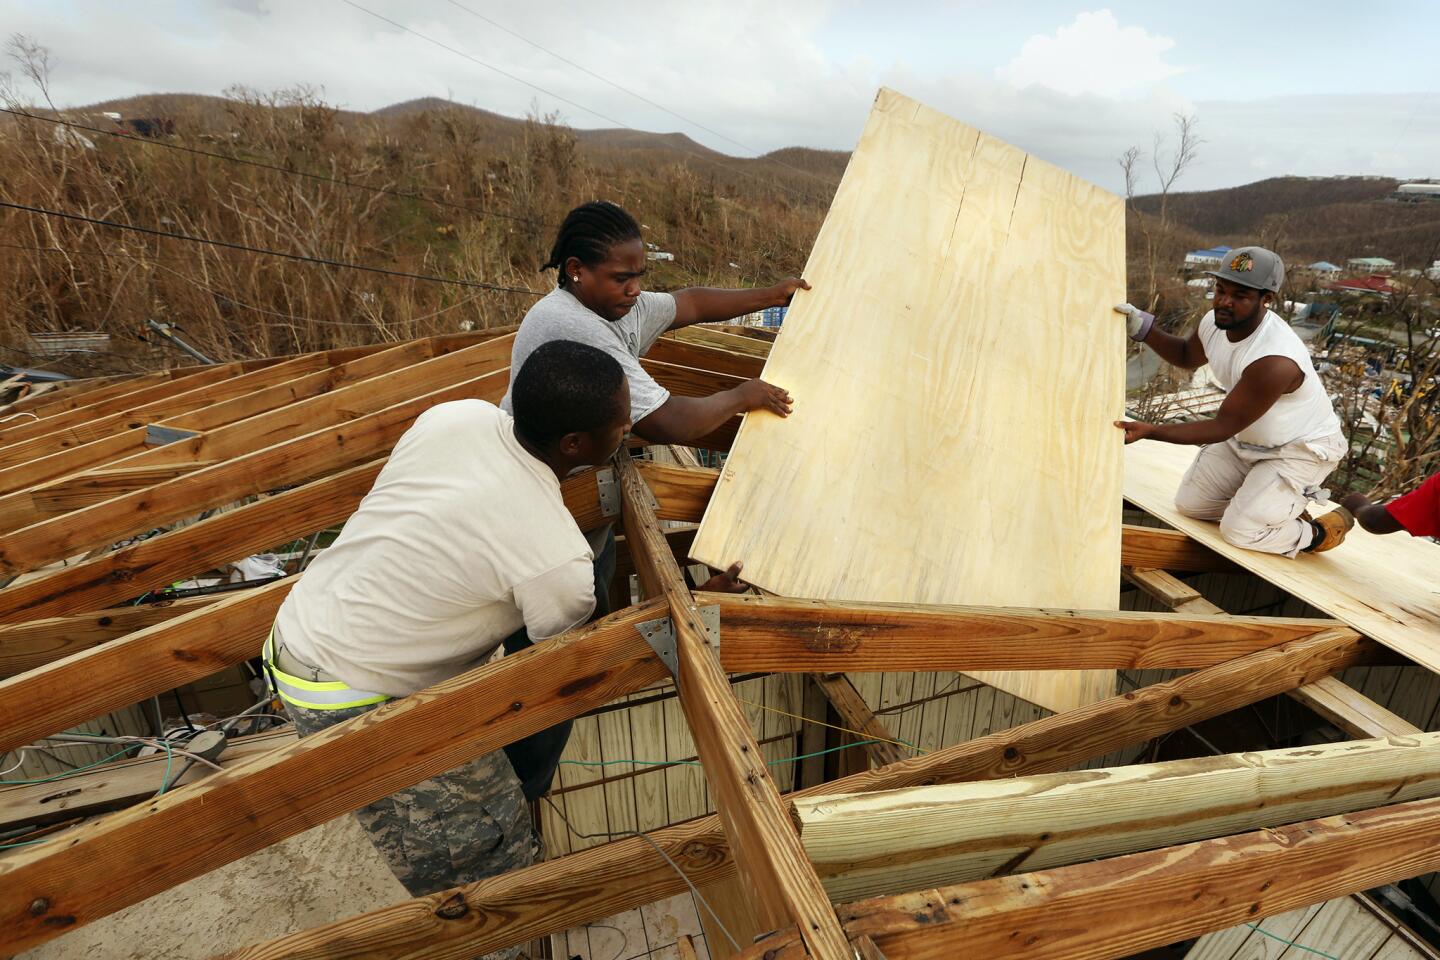 In Cruz Bay on St. John in the Virgin Islands, which already took a severe lashing from Hurricane Irma, workers rush to fix a roof in advance of Hurricane Maria.